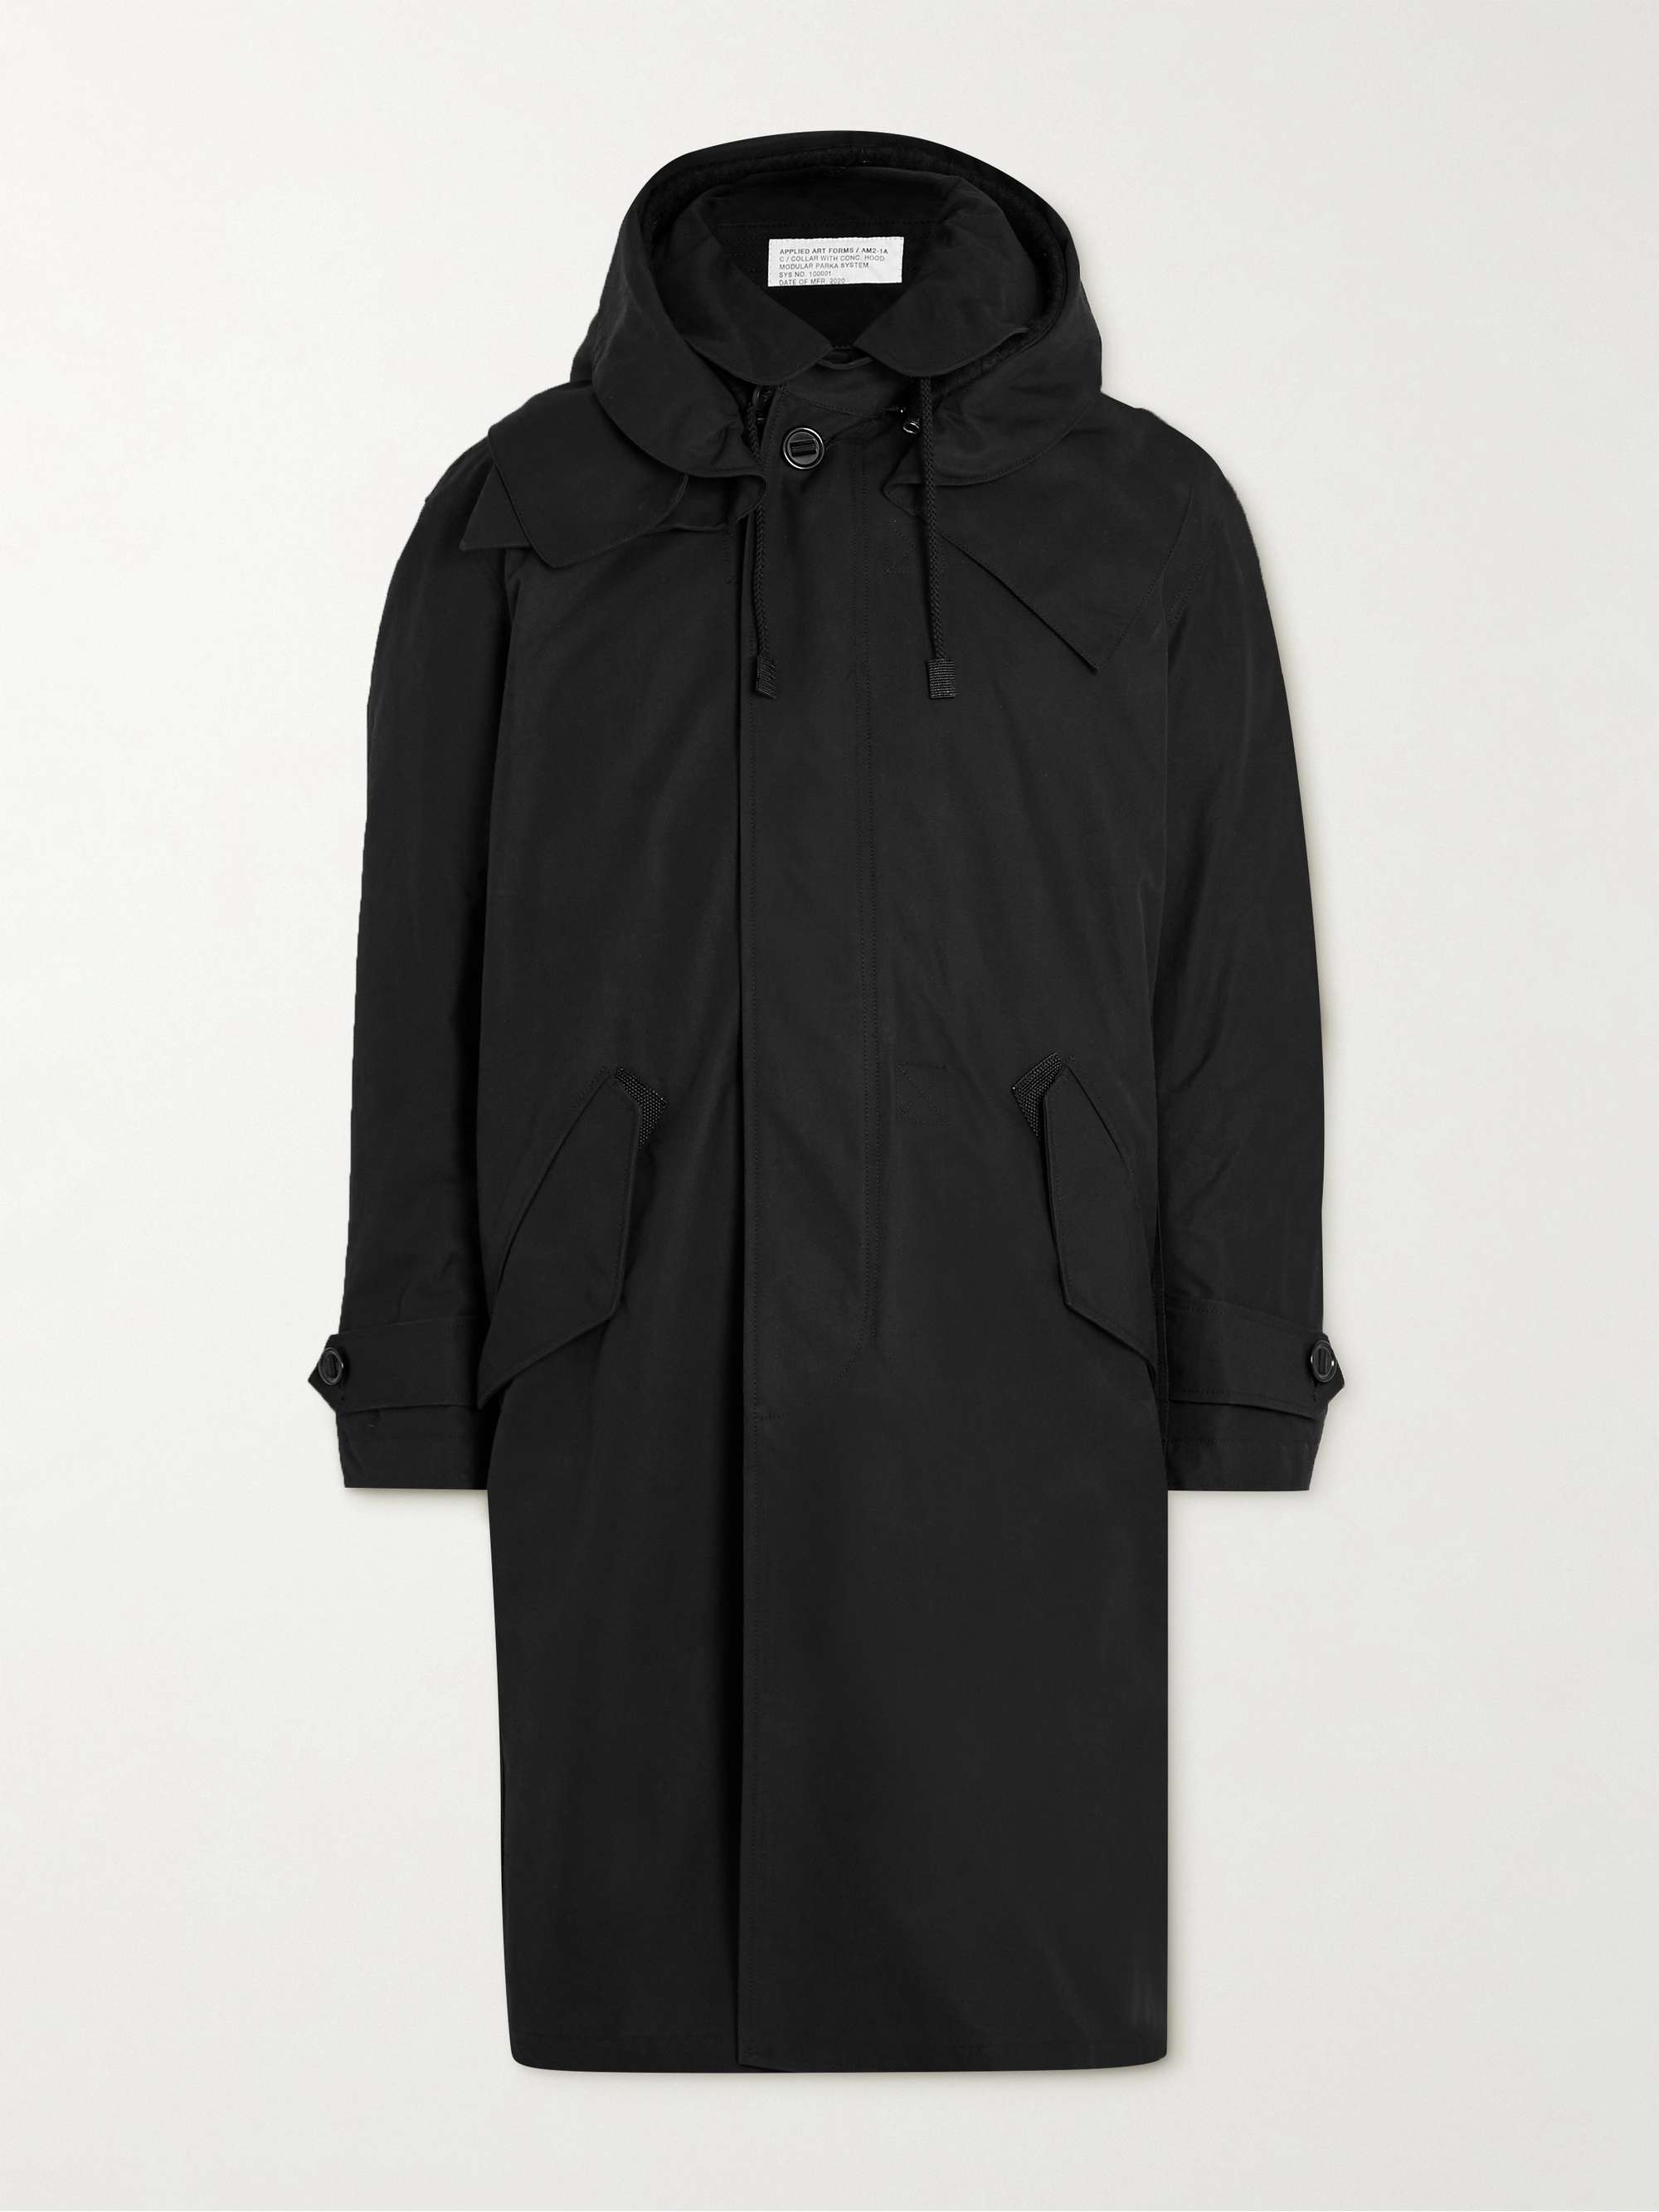 APPLIED ART FORMS AM2-1 Convertible Padded Cotton-Ventile Hooded Parka with Detachable Liner